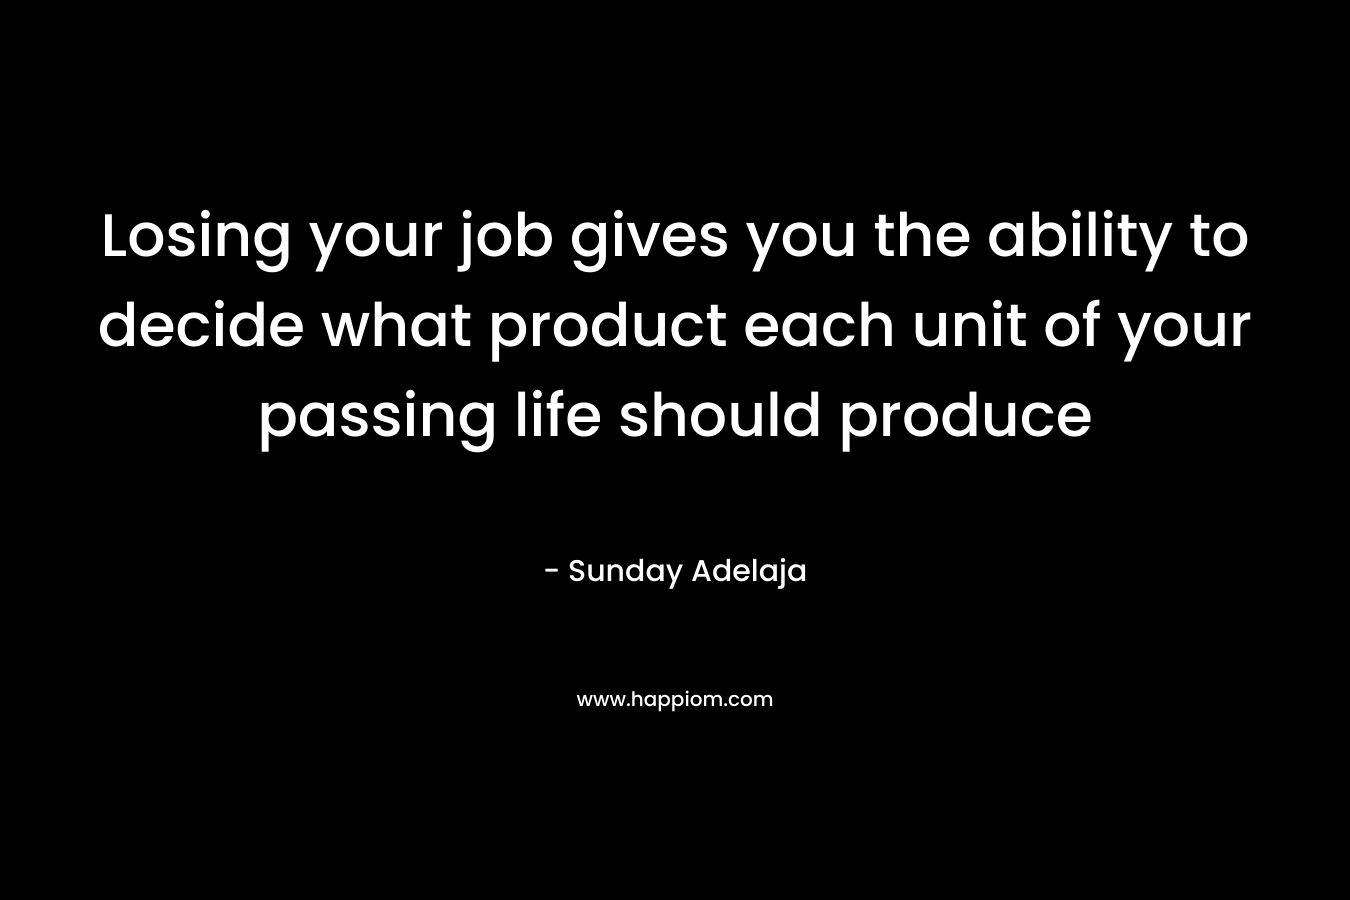 Losing your job gives you the ability to decide what product each unit of your passing life should produce